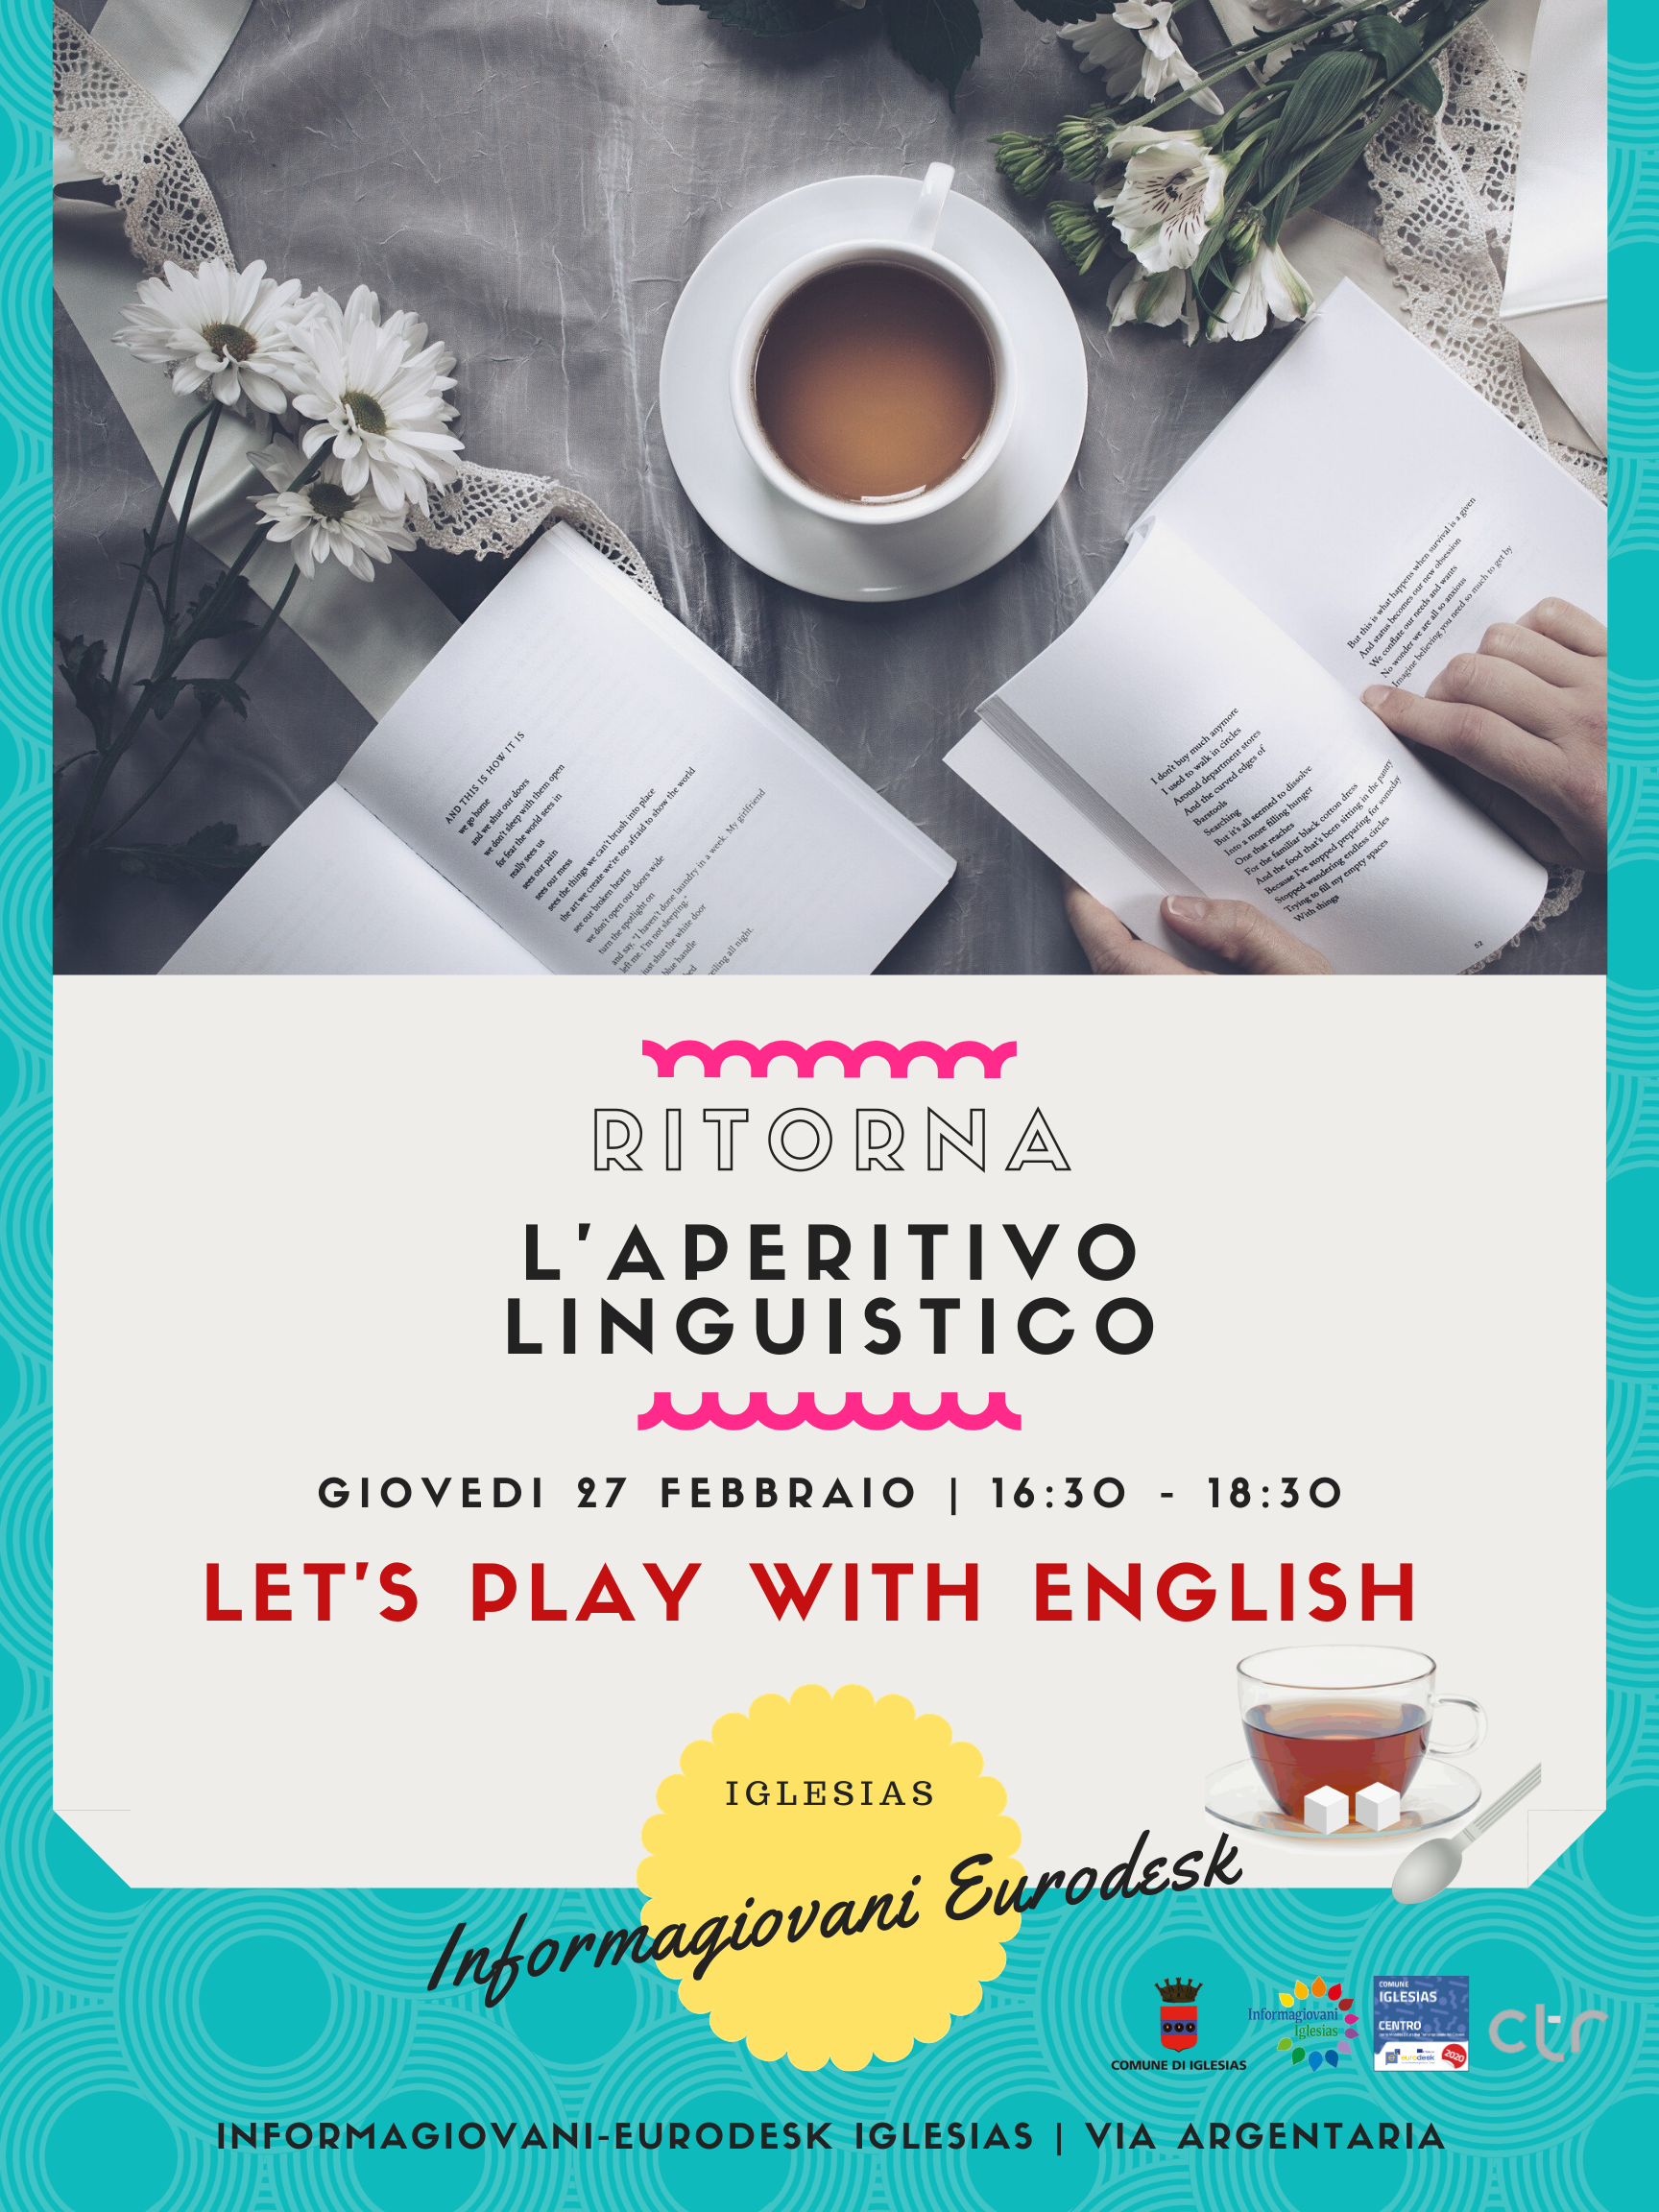 Let’s Play with English! Aperitivo in lingua inglese